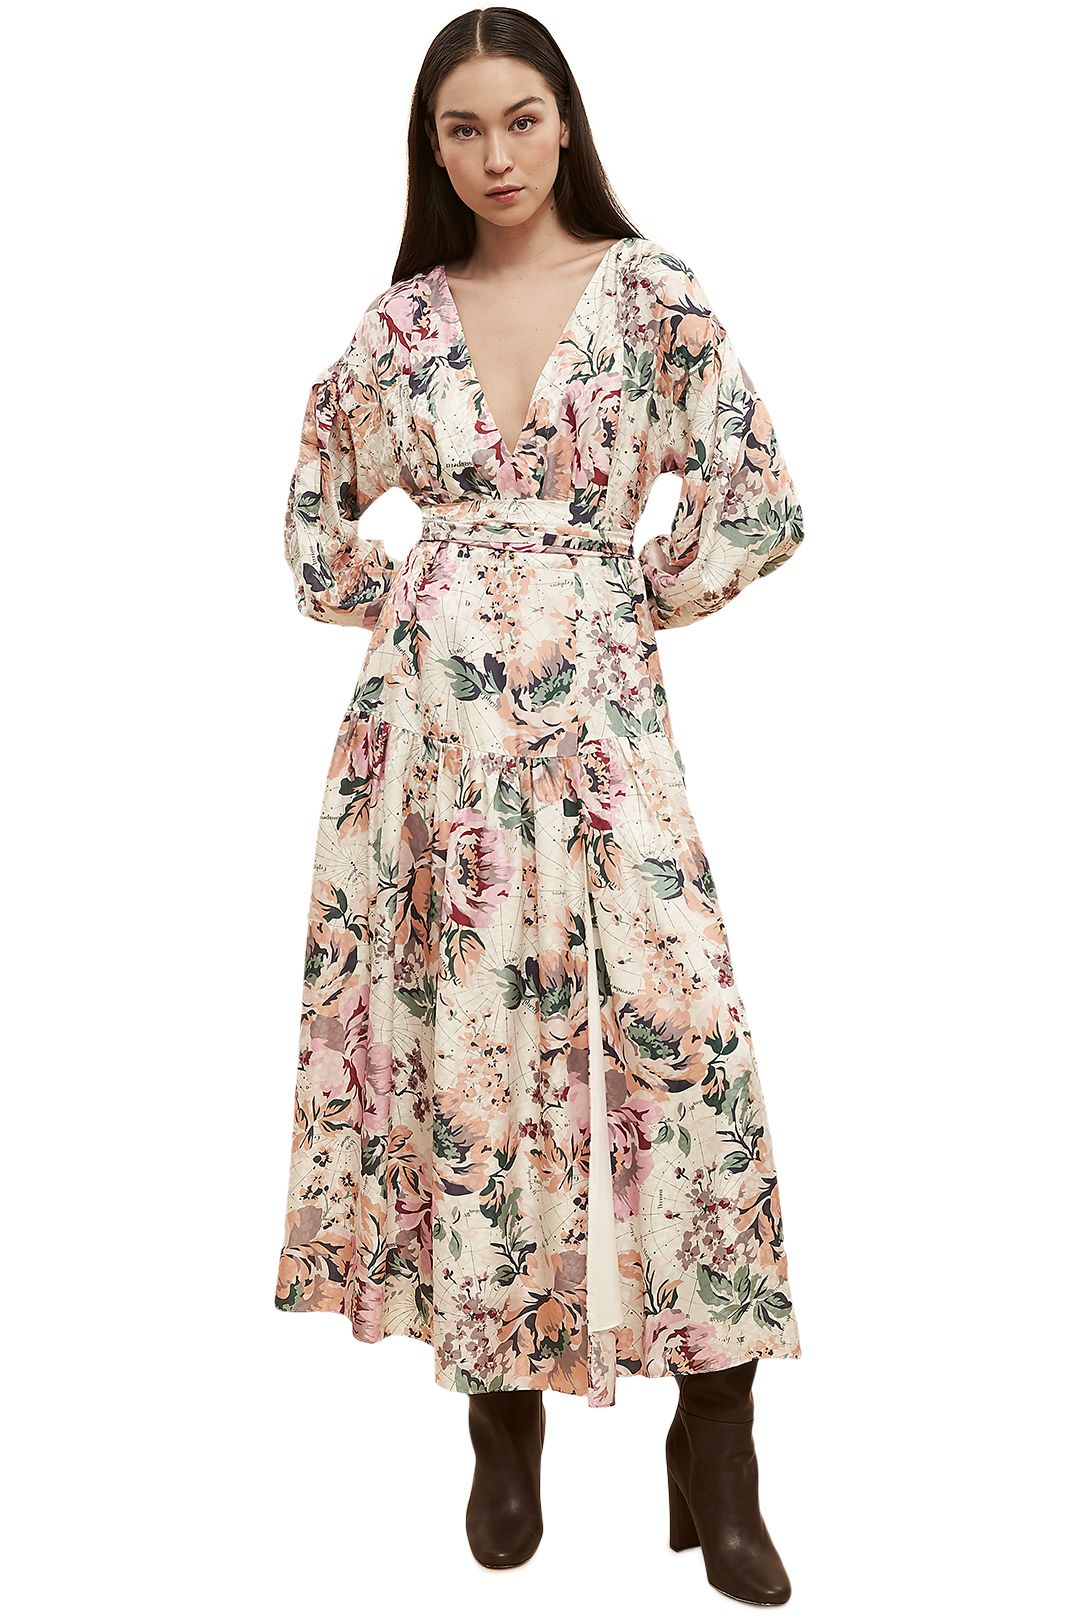 Floral Charts Wrap Dress by Ginger and Smart to Buy | GlamCorner